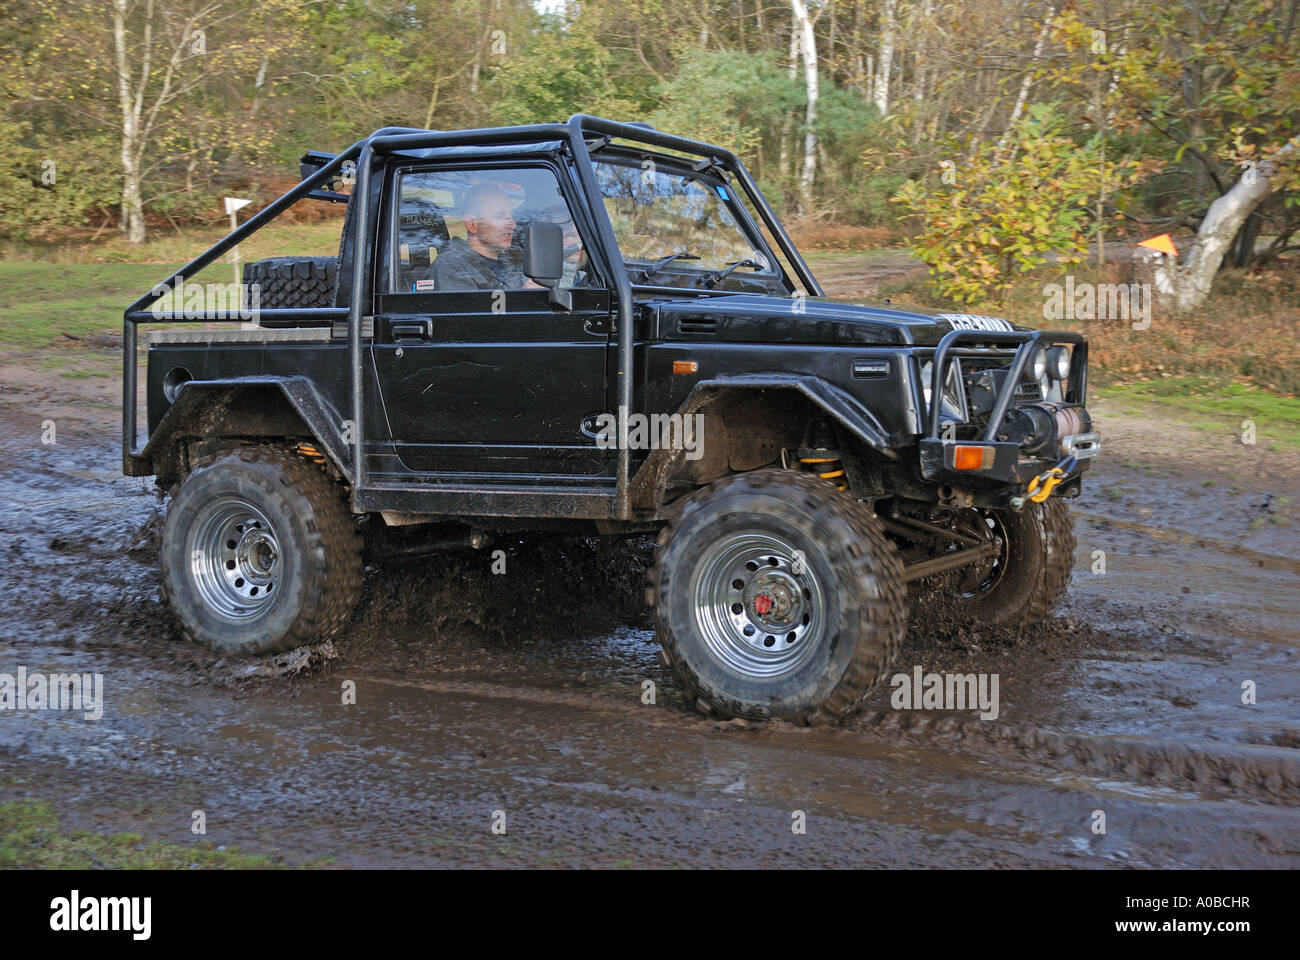 D0001009w Suzuki Samurai based trialler with roll cage alloy wheels raised supension winch free wheeling hubs and 4WD Stock Photo